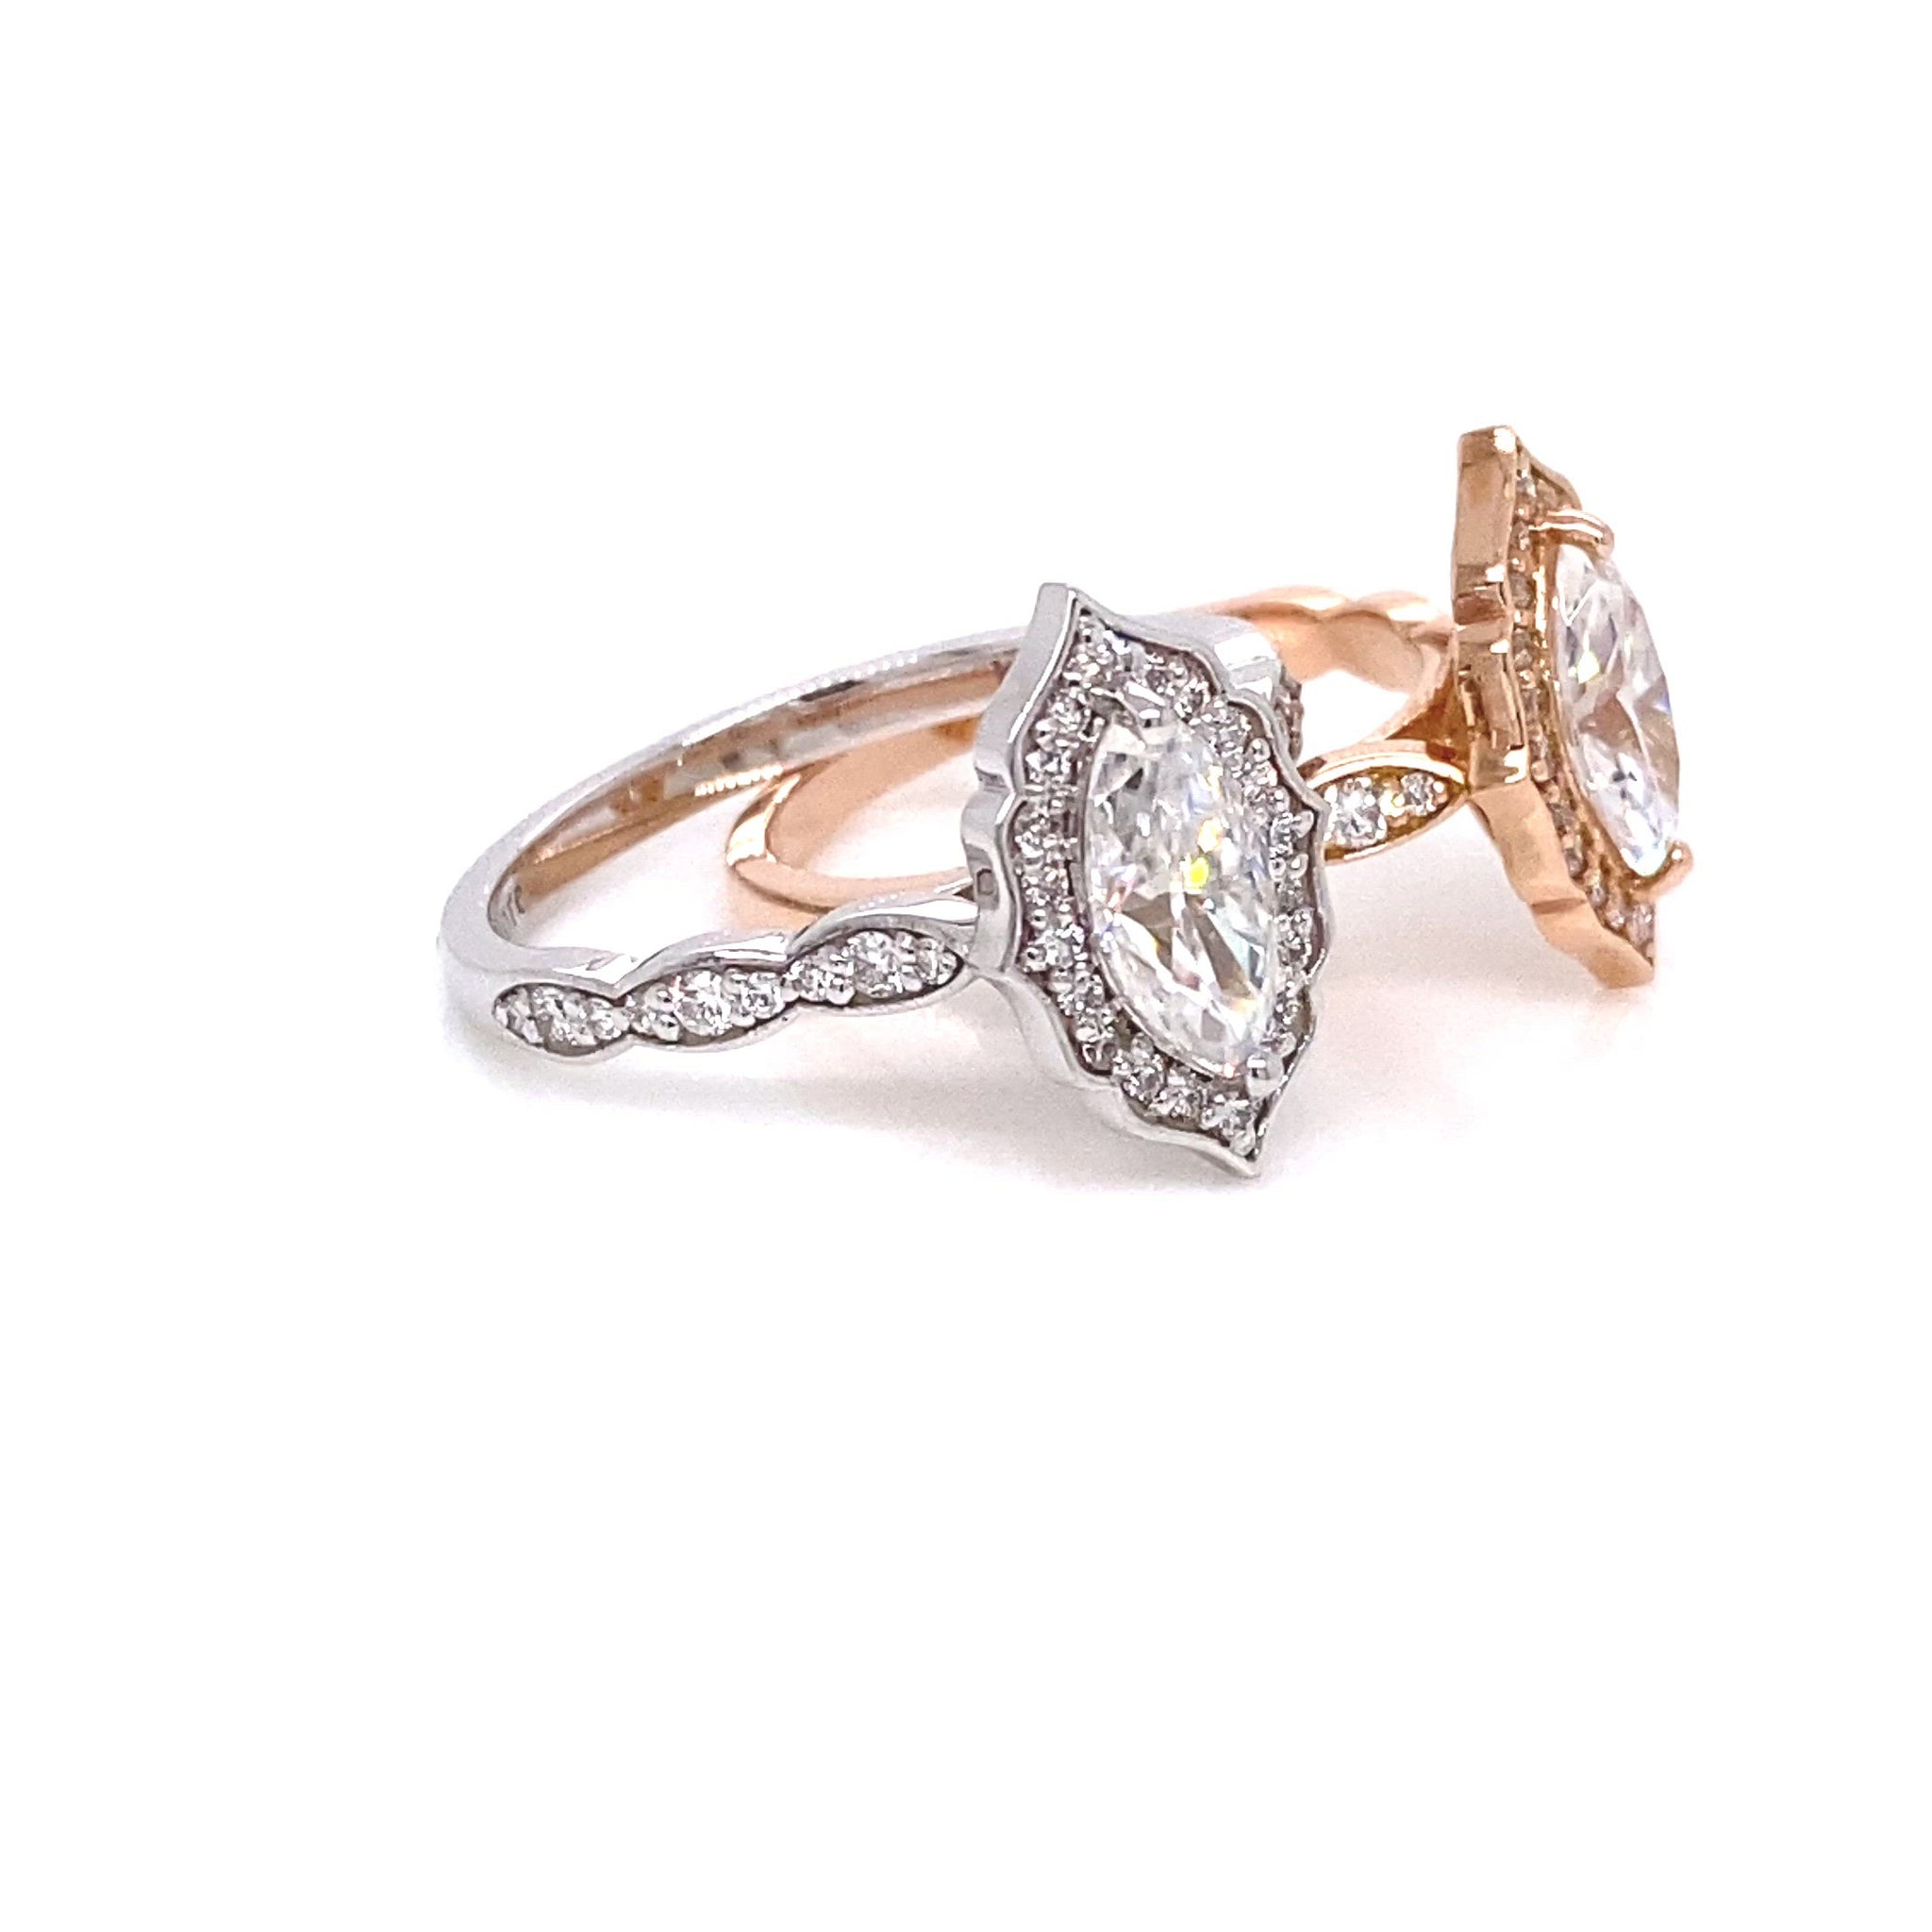 Breathtakingly unique creation! This moissanite engagement ring is set in 14k white gold and rose gold vintage floral diamond ring setting with a 9x4.5mm marquise cut Forever One Moissanite. This marquise moissanite ring is perfect for brides looking for non-traditional engagement rings. It can be made in your choice of platinum or 18k or 14k yellow, rose or white gold. Matching bridal ring set is available.